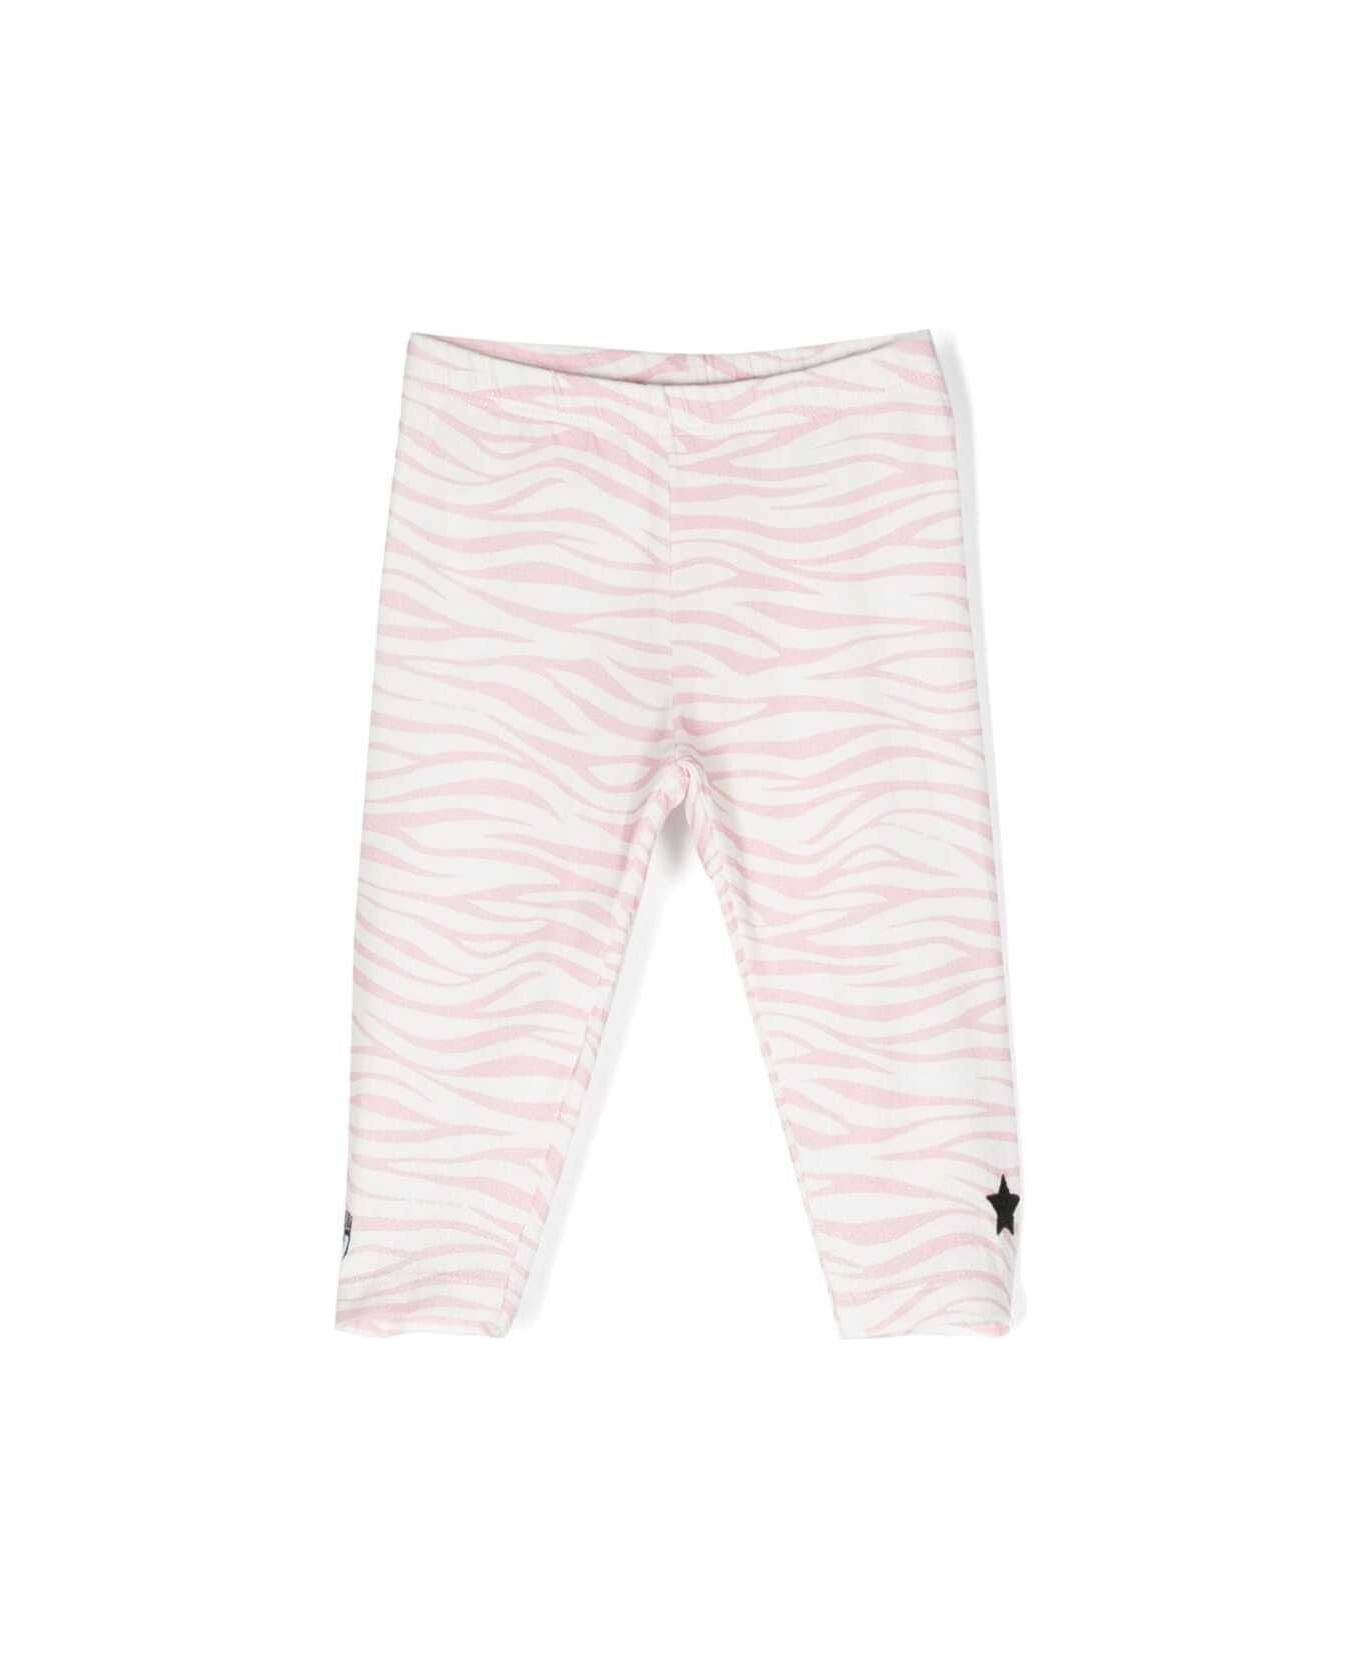 Chiara Ferragni Pink And White Leggings With Zebra And Logo Print In Stretch Cotton Girl - Pink ボトムス